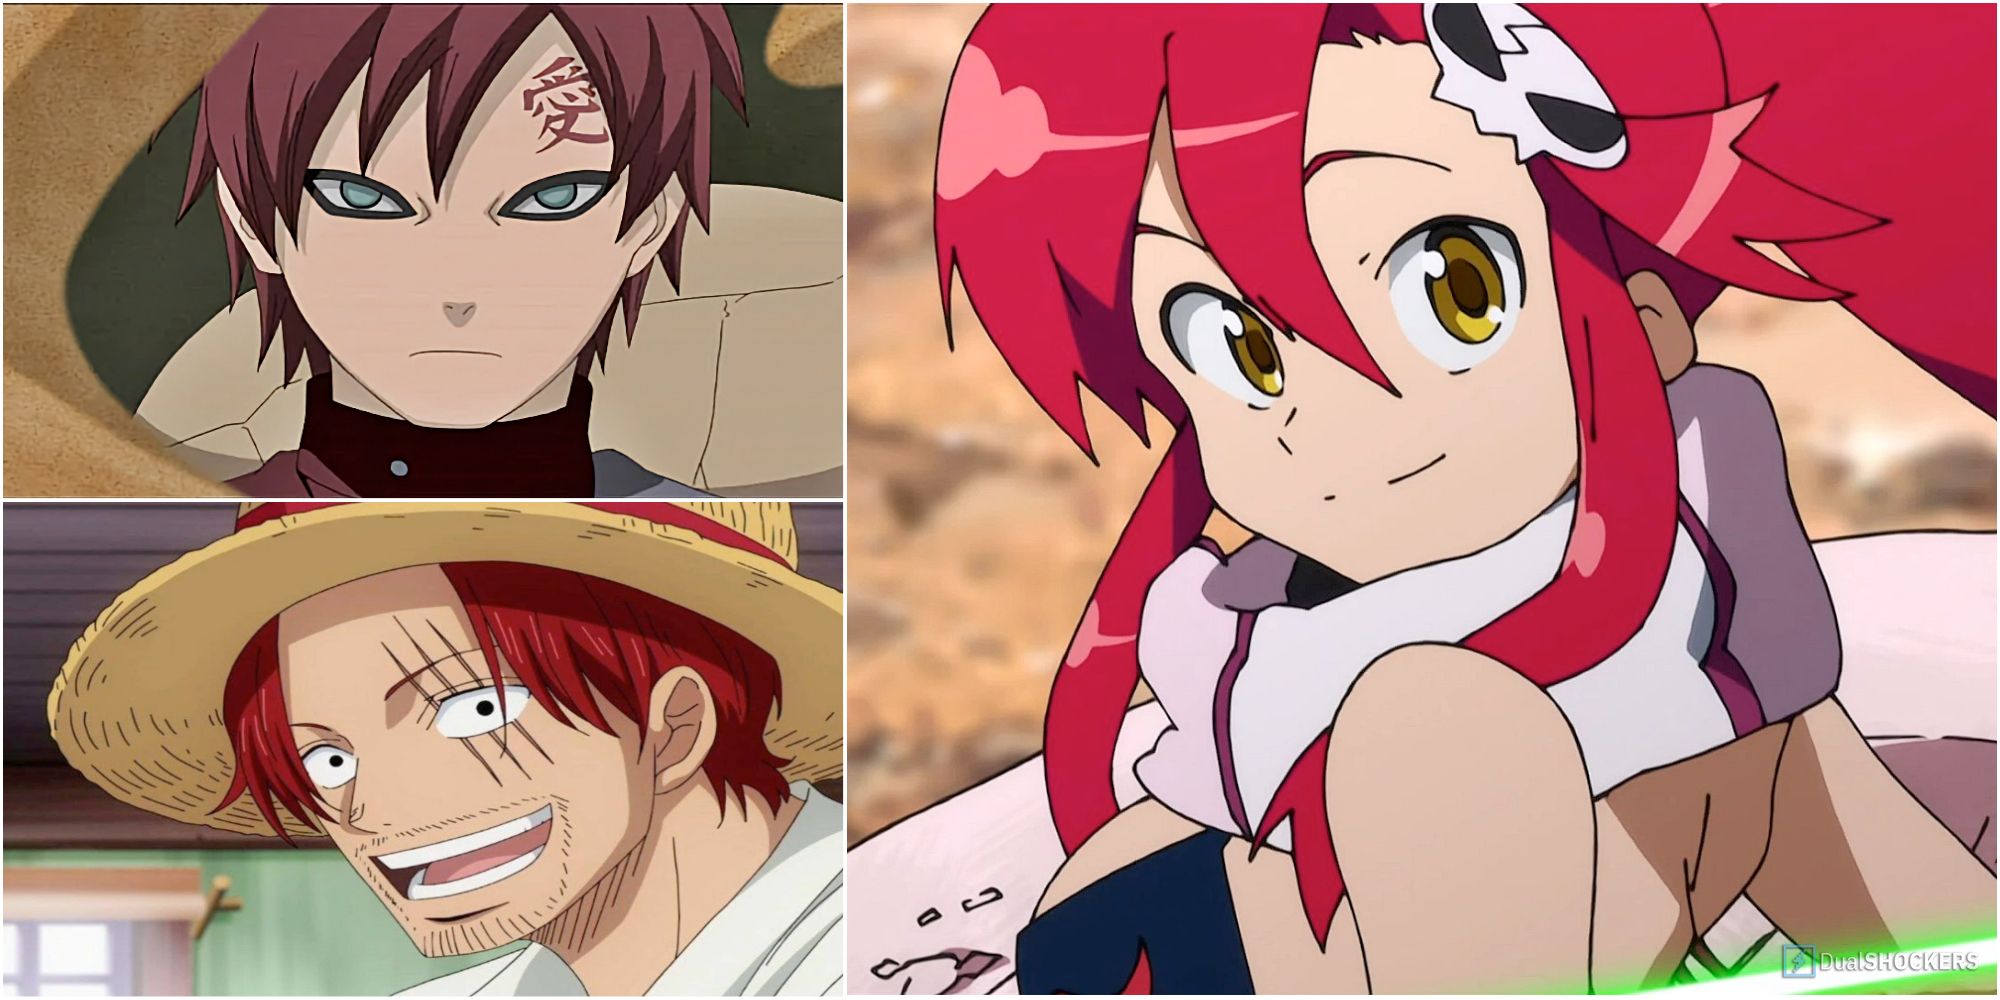 Who are the hottest red-haired male teen anime characters ever? - Quora